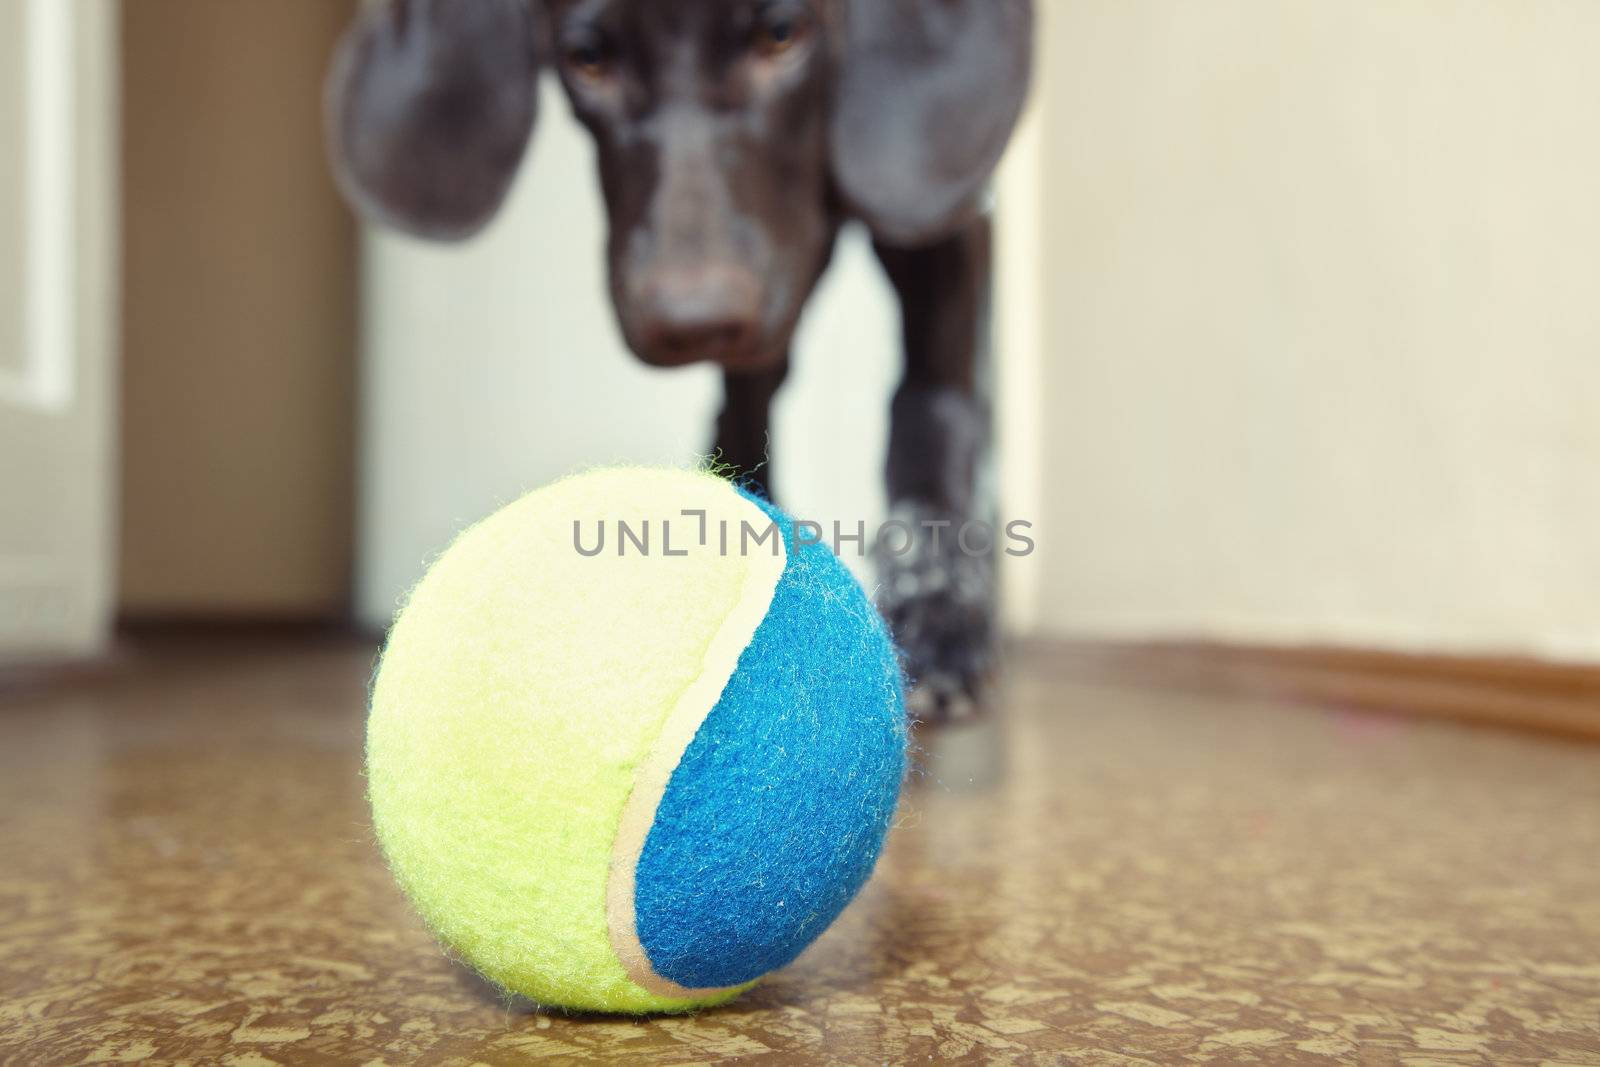 Dog and ball by Novic